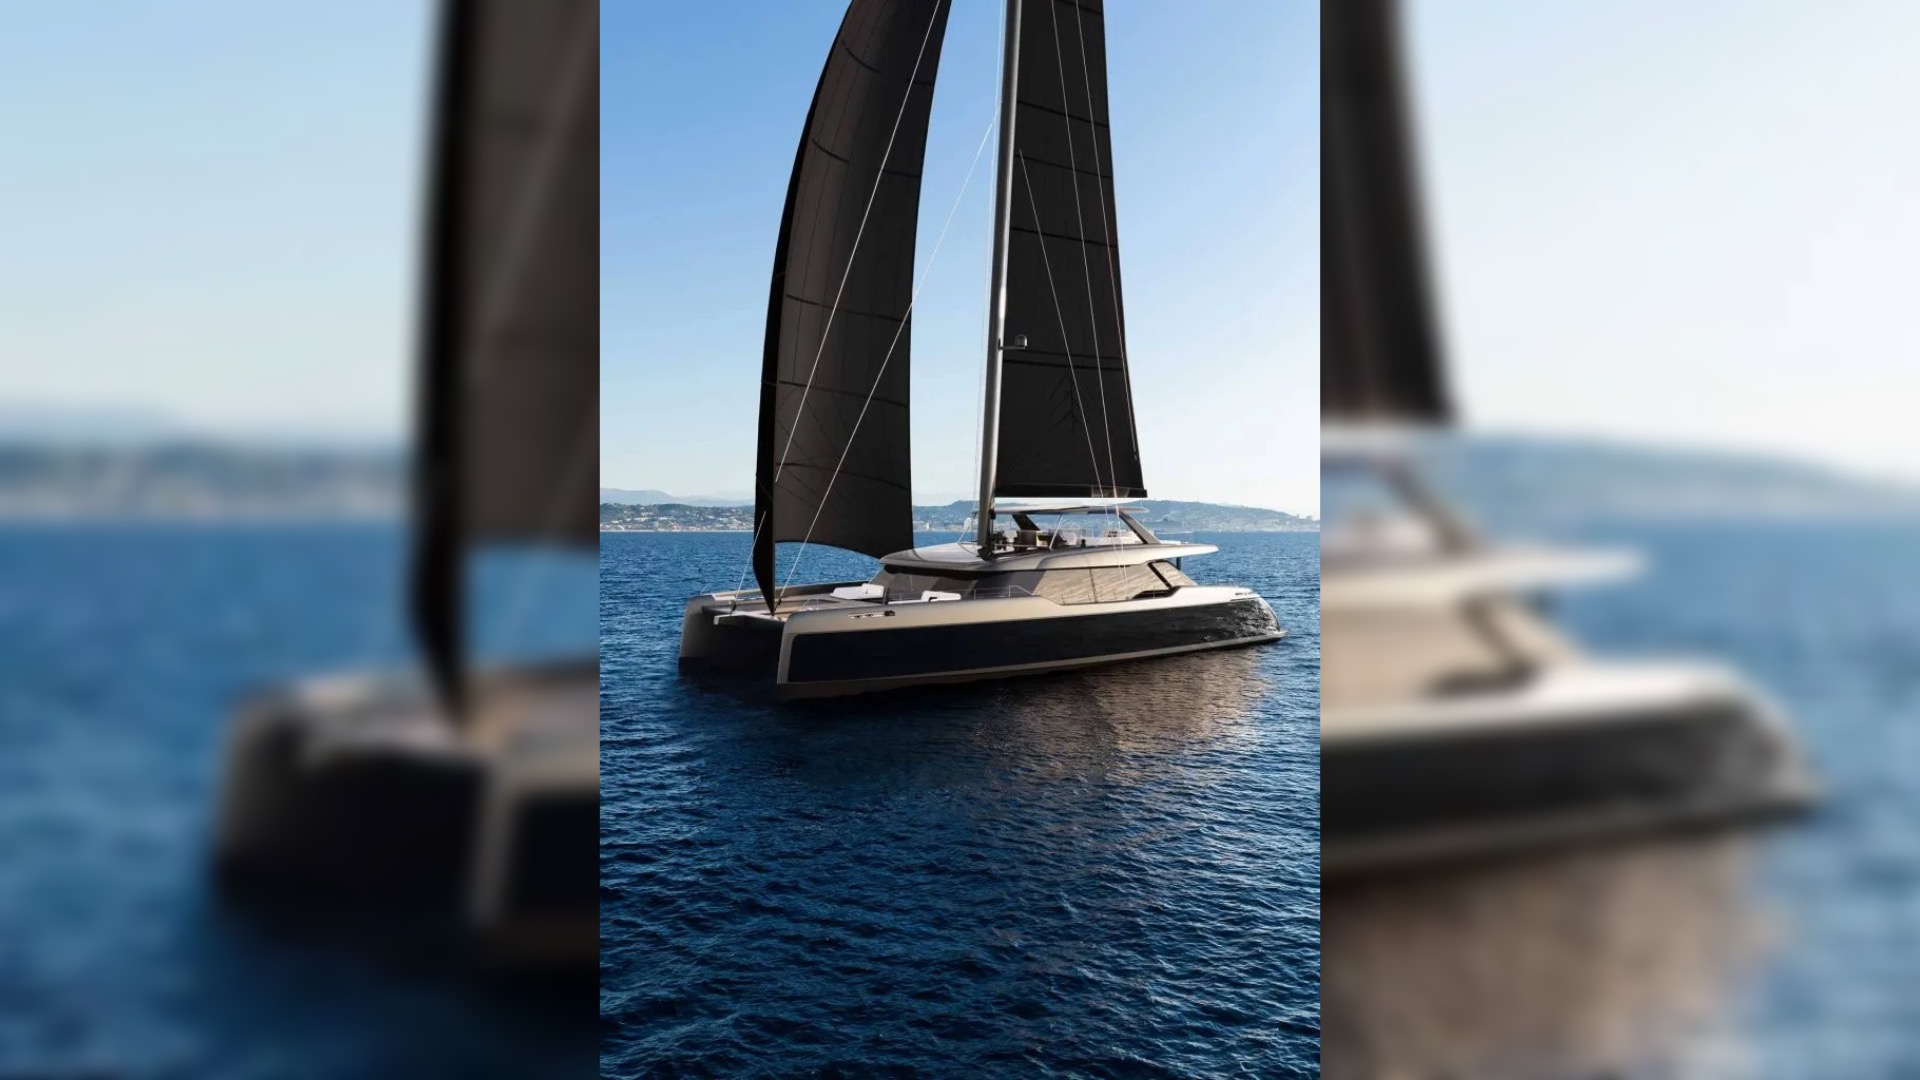 Reportedly, Sunreef’s yachts have attracted A-list celebrities like Rafael Nadal and Fernando Alonso. The Sunreef 35M Eco is a game-changer in the yachting world. With its blend of luxury, sustainability, and innovation, the 35M Eco may become the next favorite among the stars.